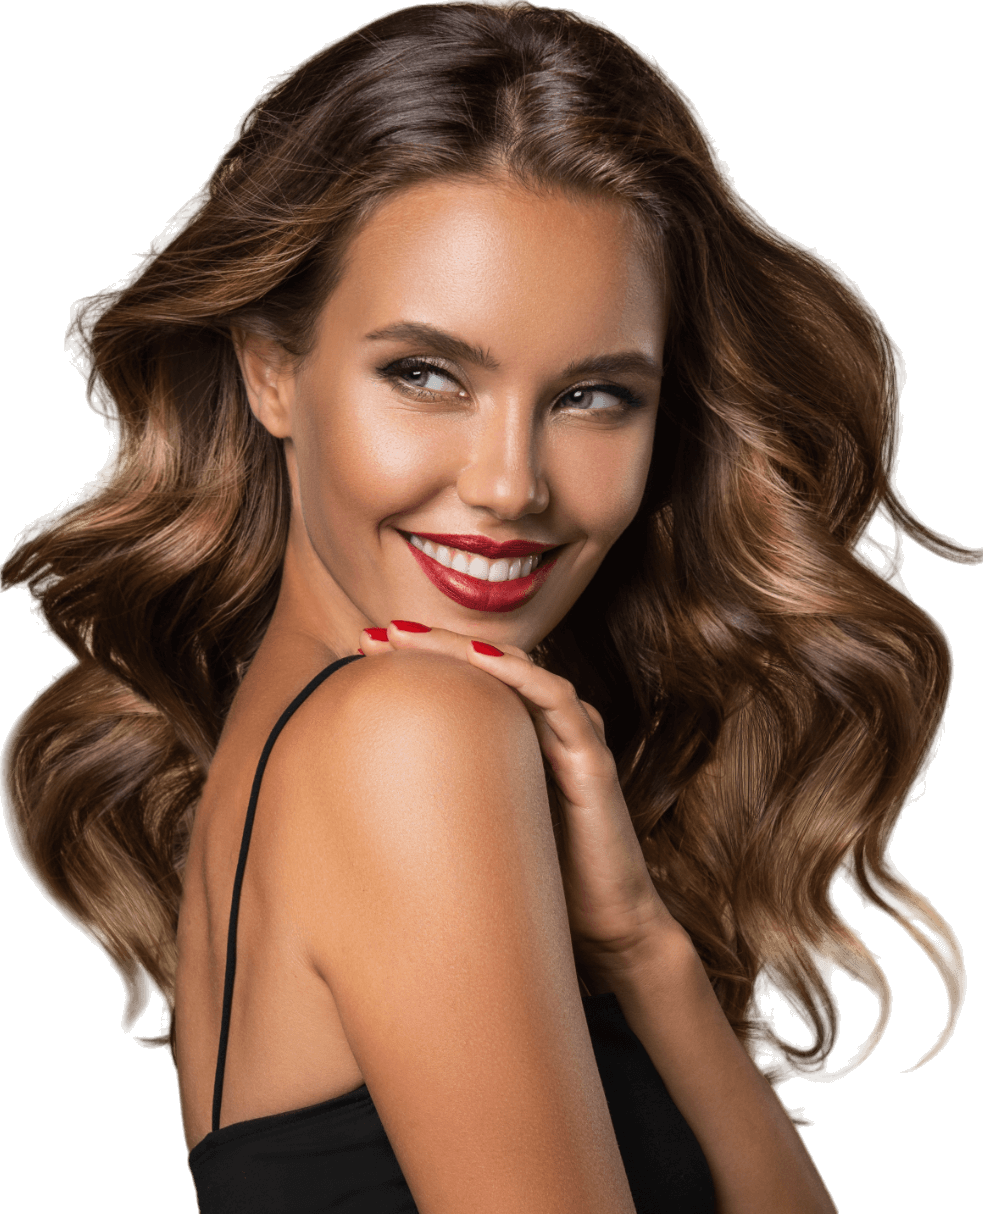 Brunette model with a tan and red lipstick, smiling but looking away from the camera